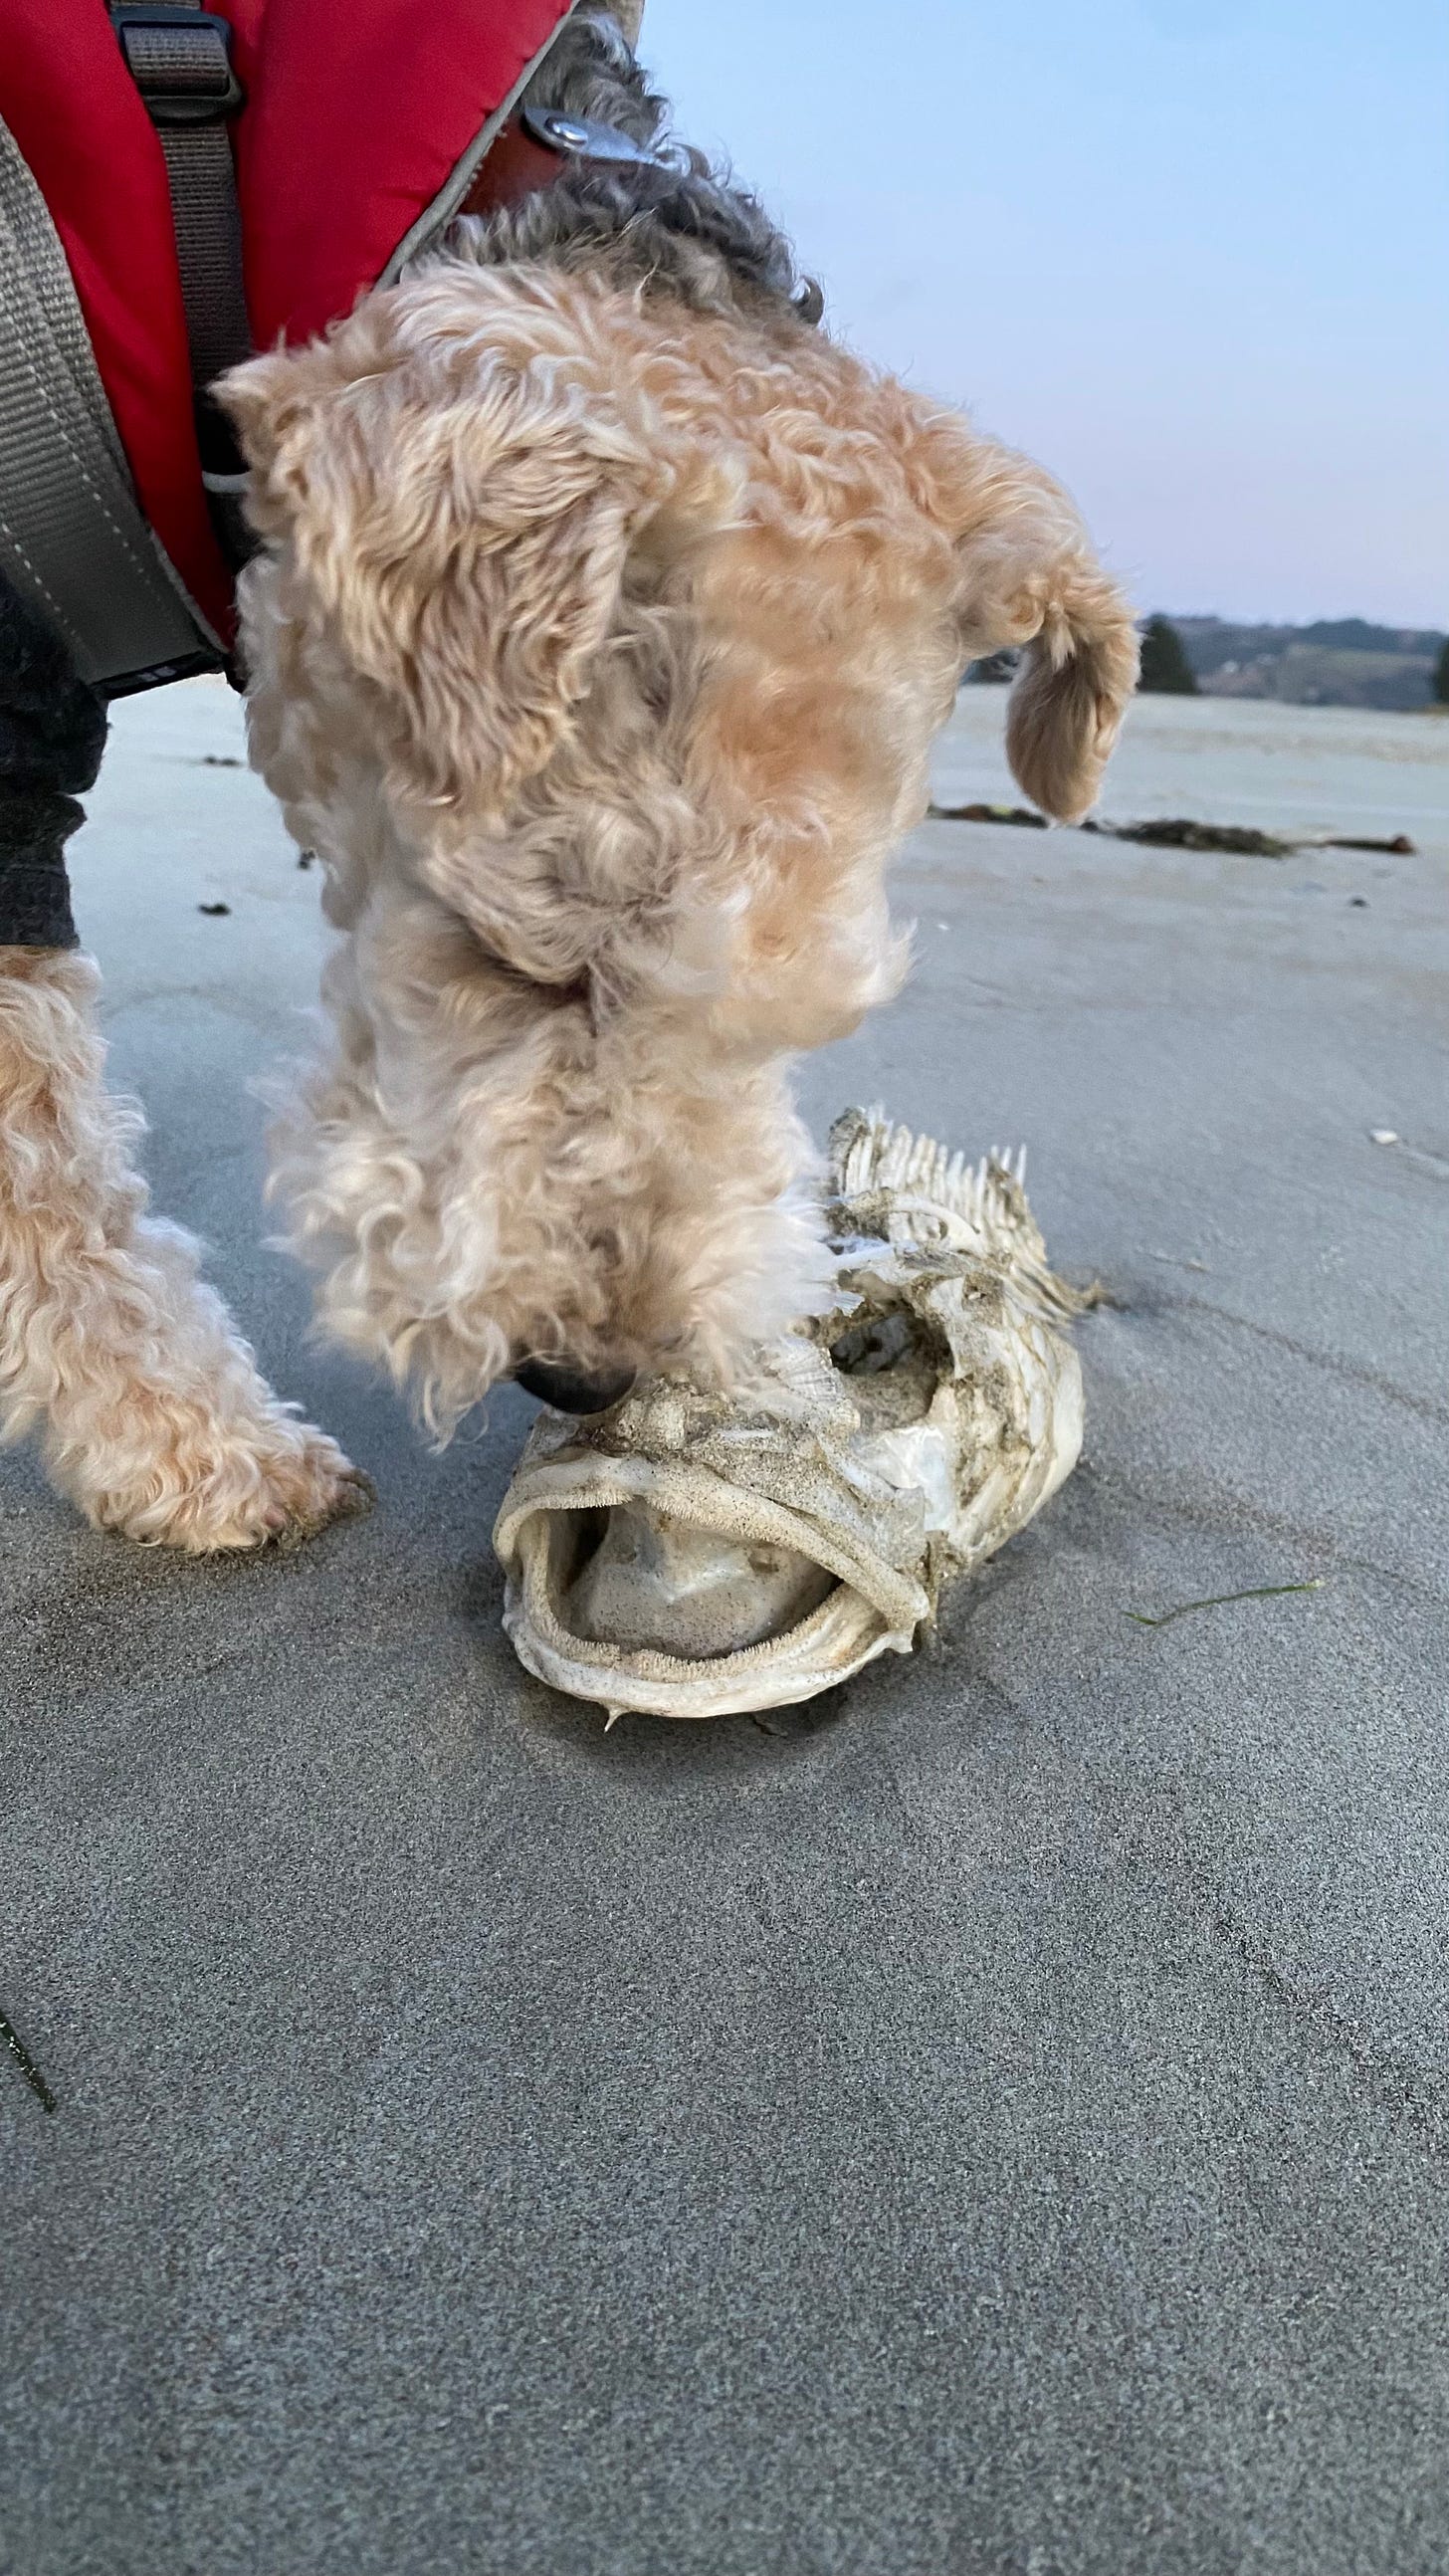 Nutmeg in close-up. The background is of a sandy beach. She is sniffing something — a fish skeleton with a big, open mouth.